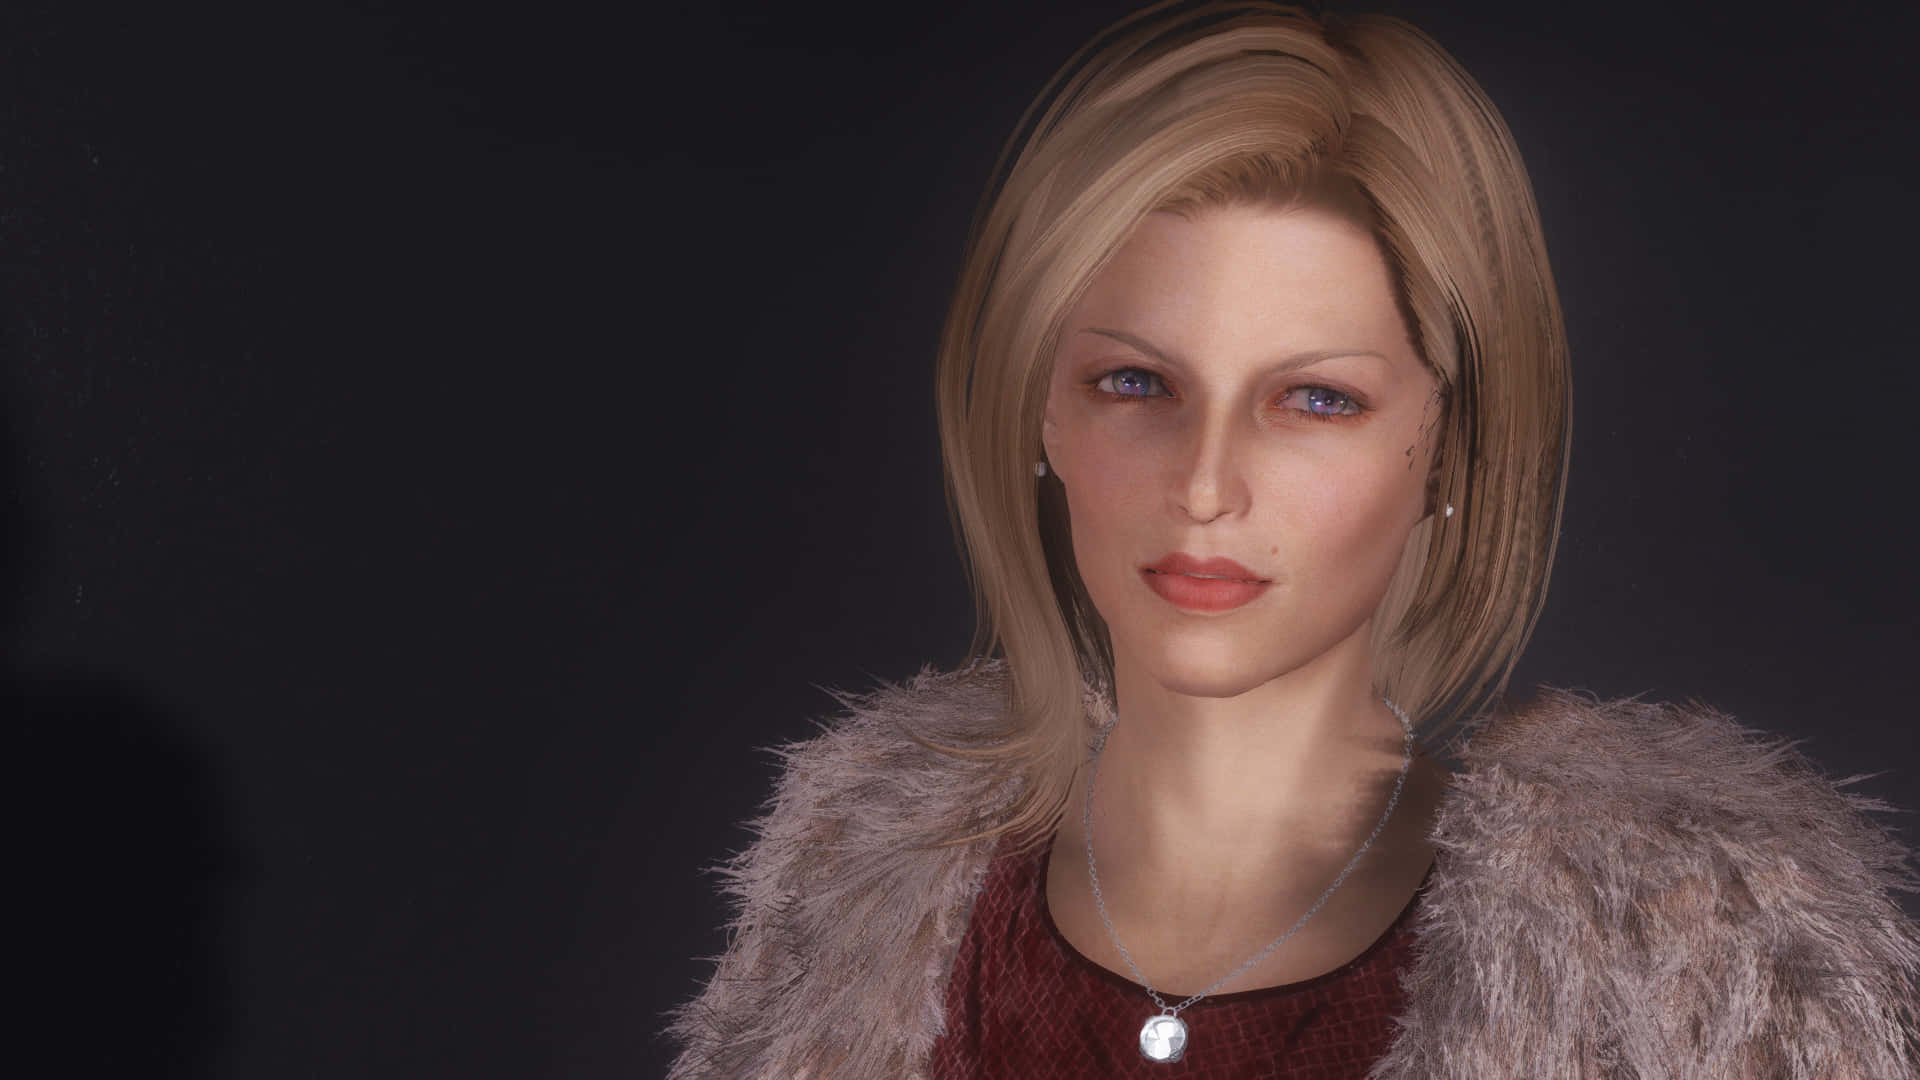 Delphine, the Blade Spy in the World of Skyrim Wallpaper